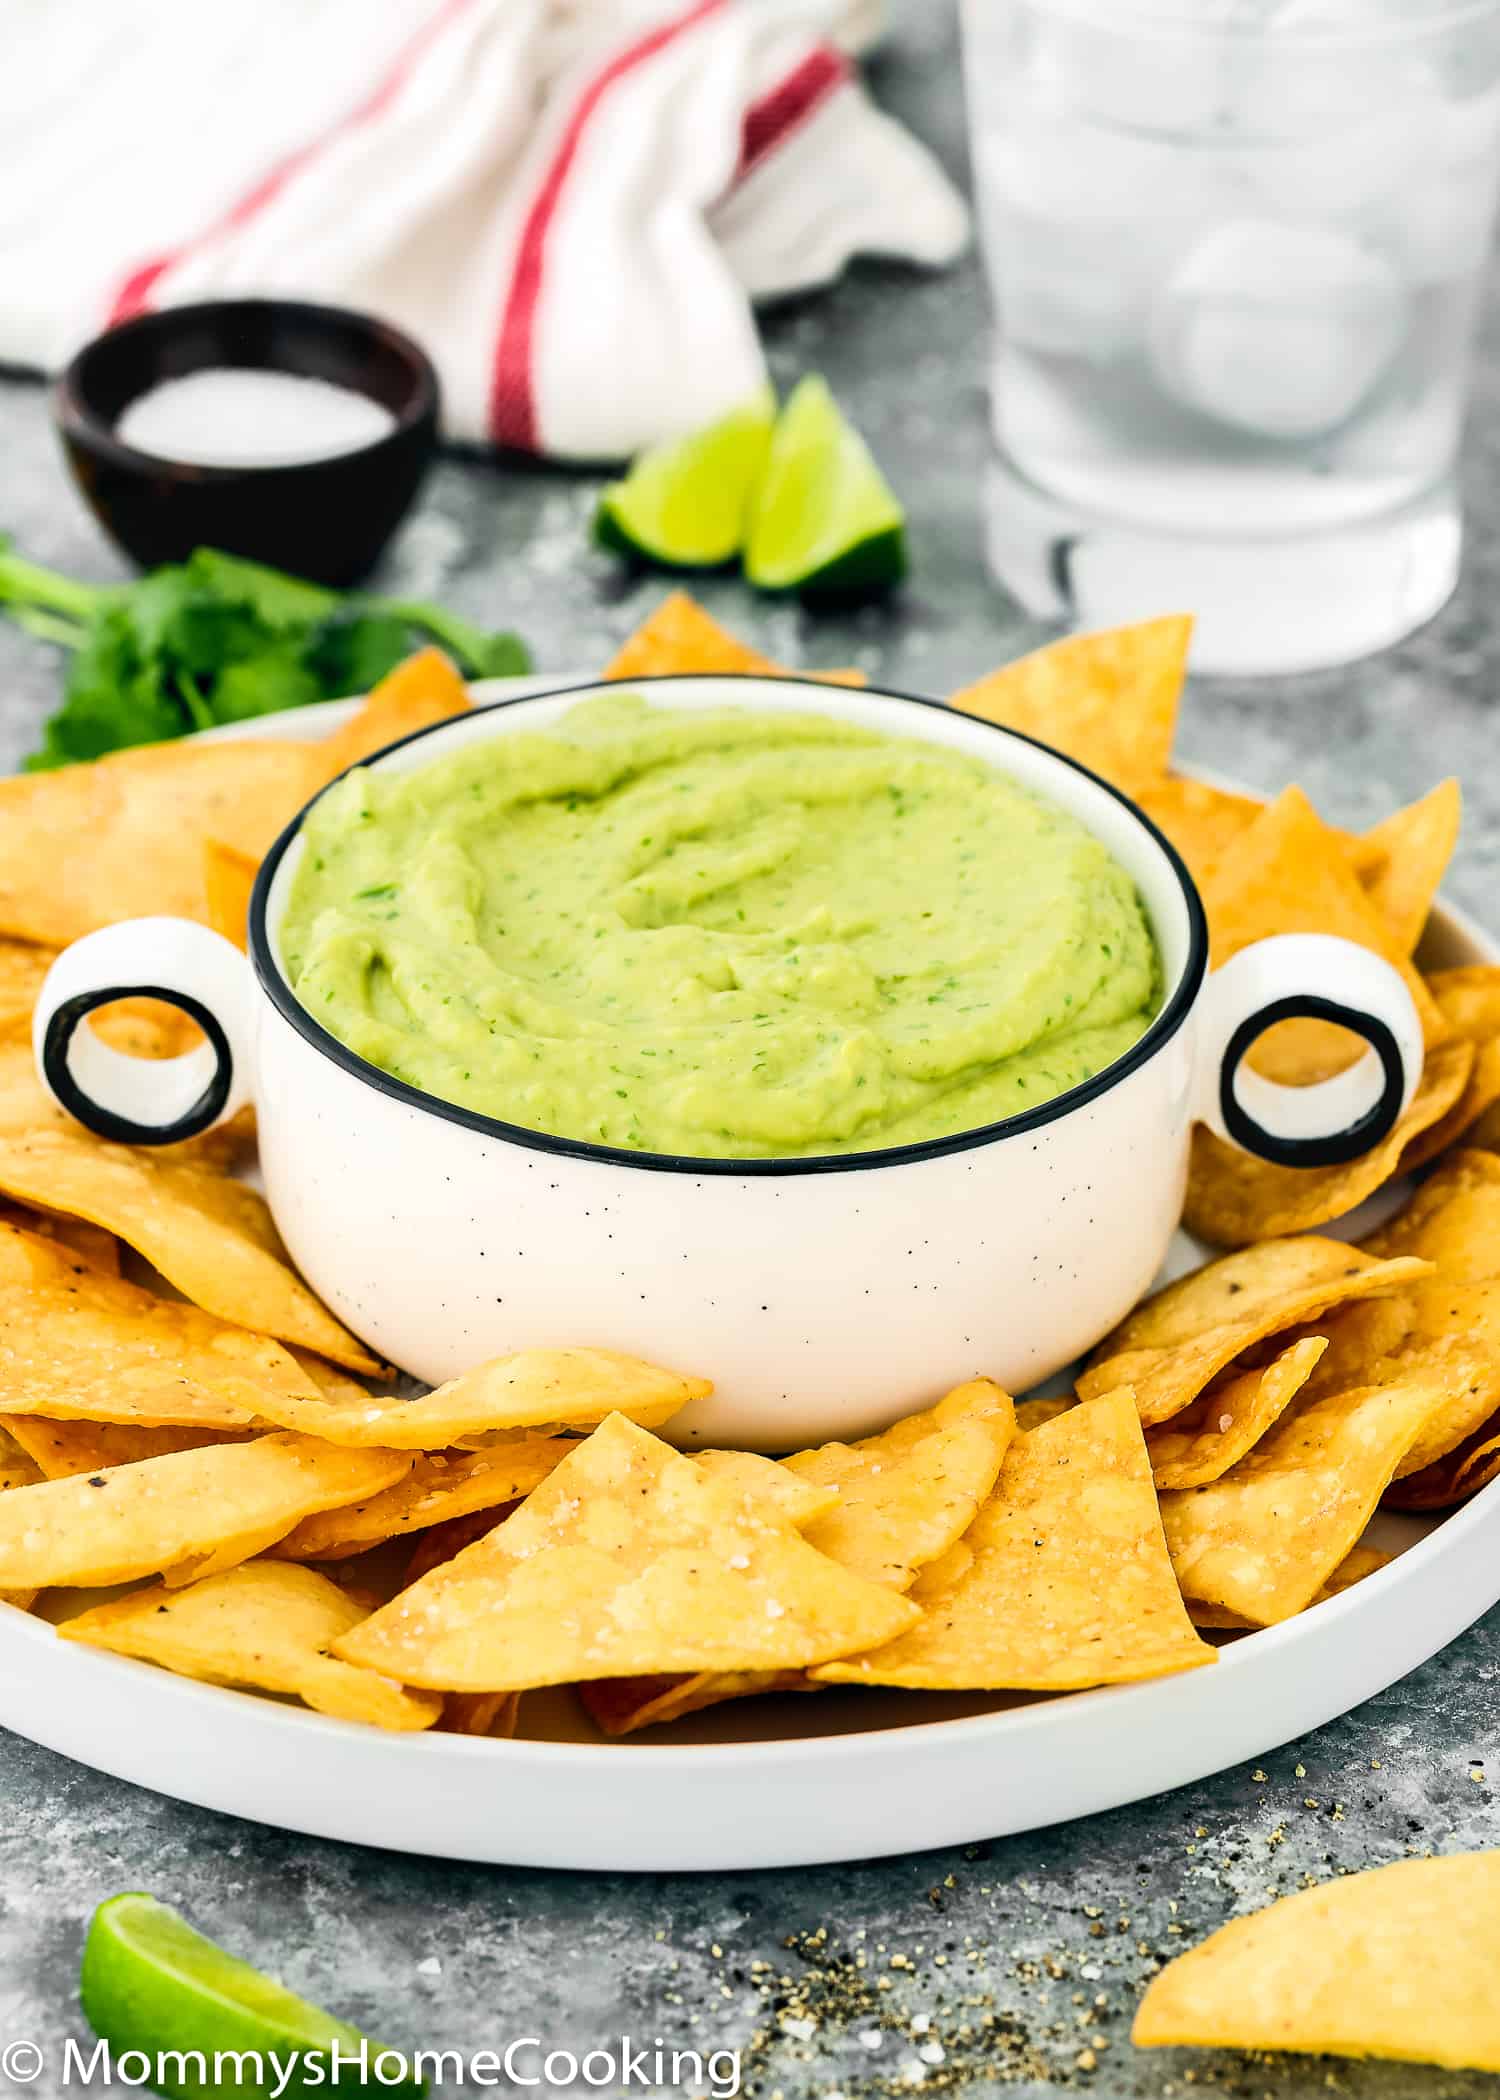 plate with tortilla chips and avocado sauce